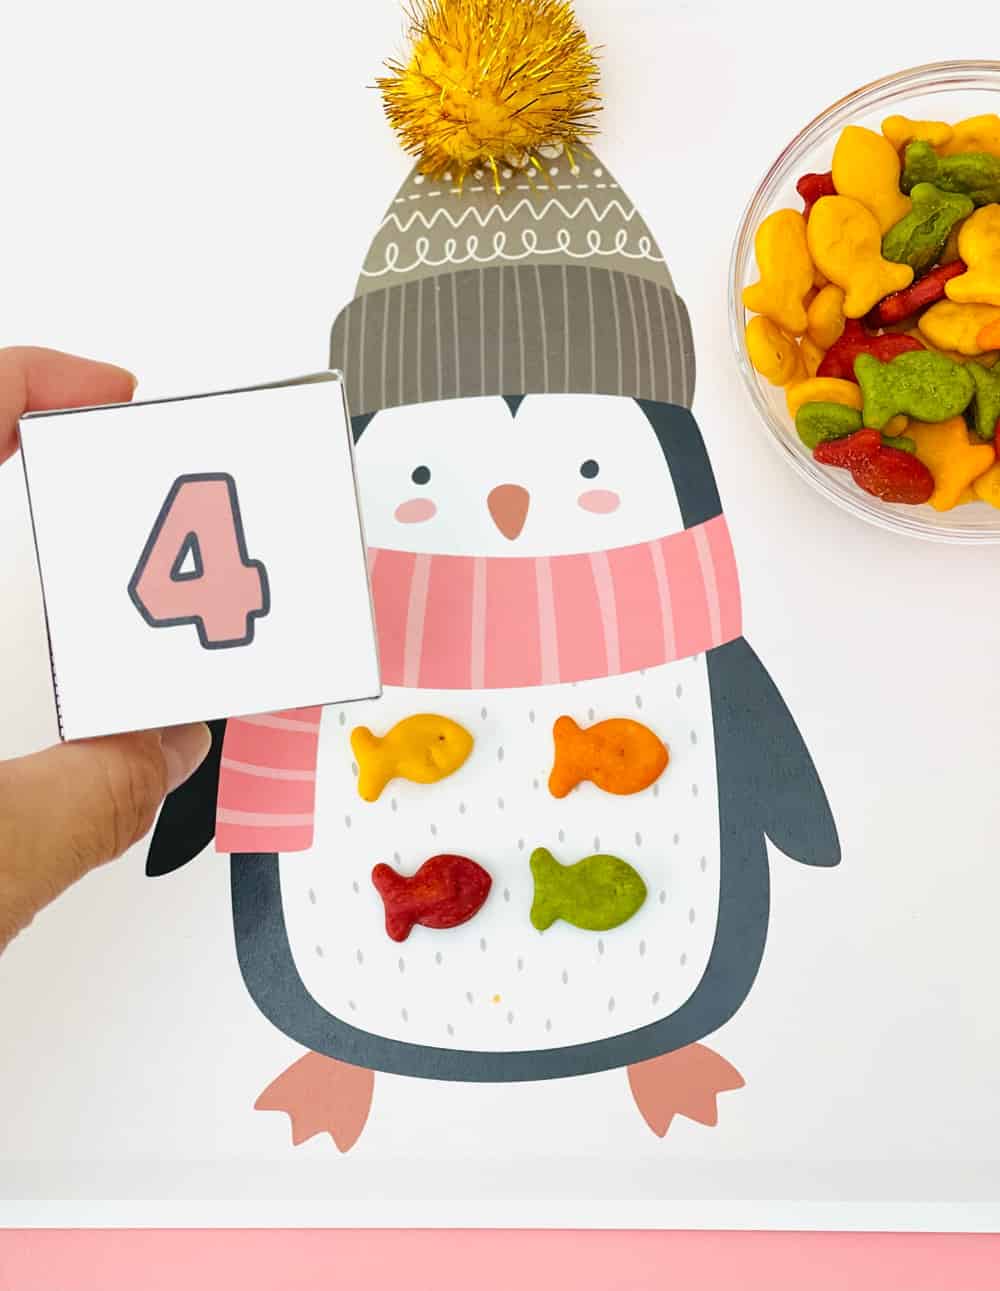 FEED THE PENGUIN WINTER ACTIVITY FOR KIDS